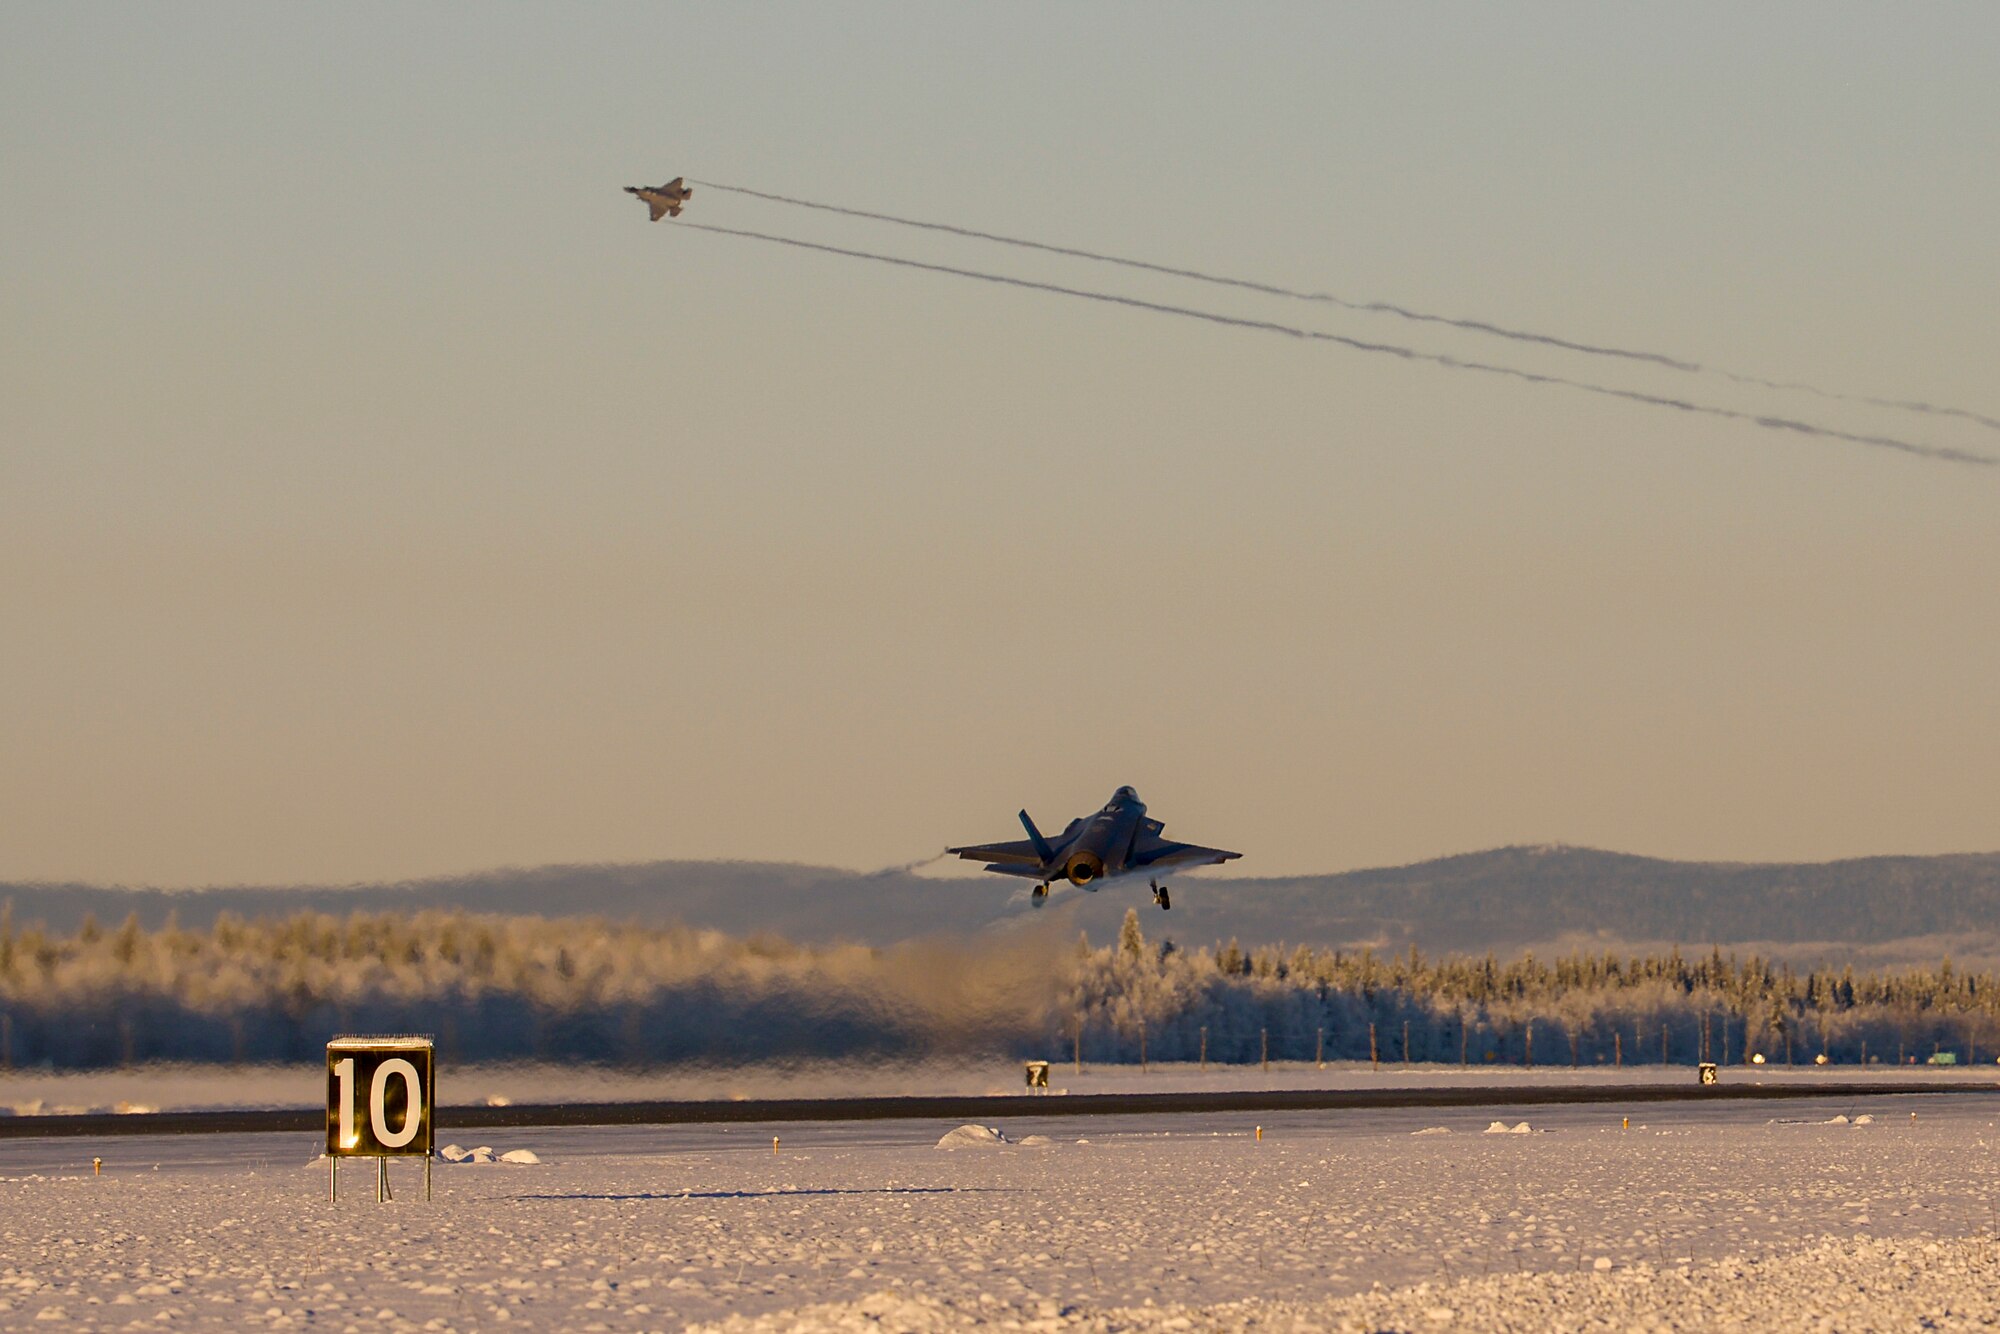 An F-35A Lightning II, assigned to the 356th Fighter Squadron, takes off during Arctic Gold 21-1 on Eielson Air Force Base, Alaska, Nov. 17, 2020. The F-35As at Eielson are strategically placed in Alaska to support the Pacific Theater and deter near-peer adversaries. (U.S. Air Force photo by Senior Airman Beaux Hebert)